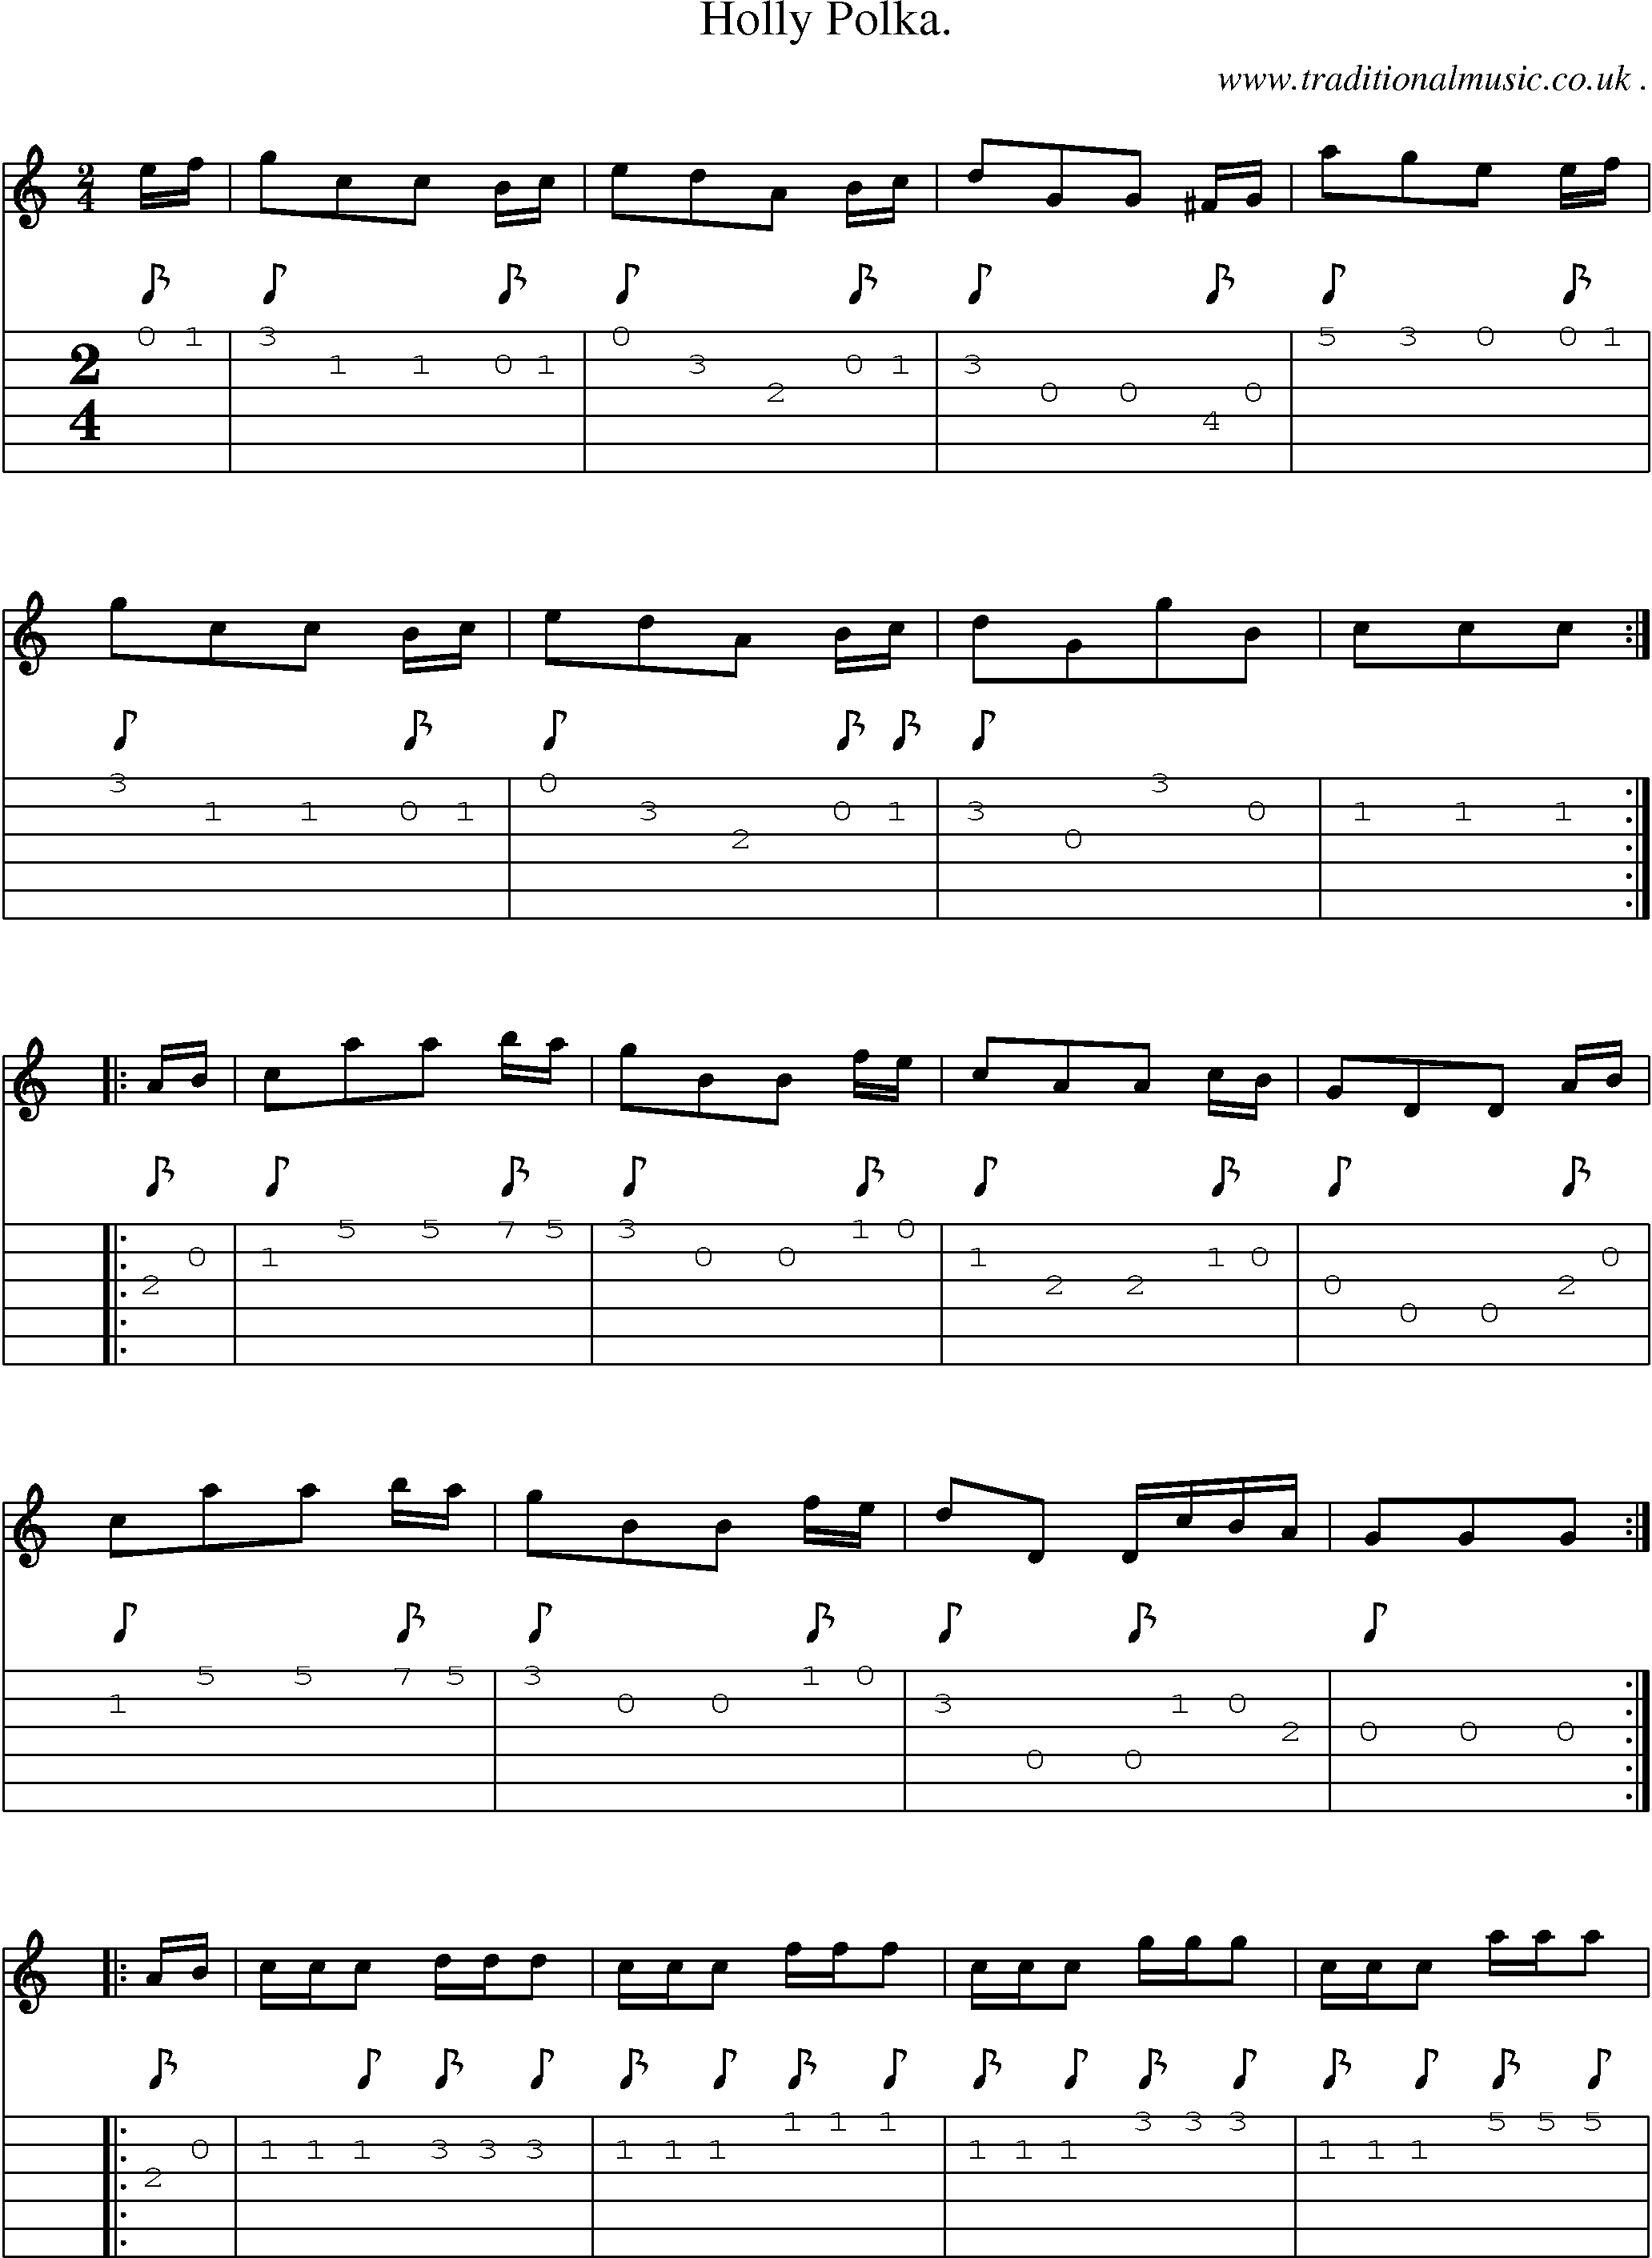 Sheet-Music and Guitar Tabs for Holly Polka